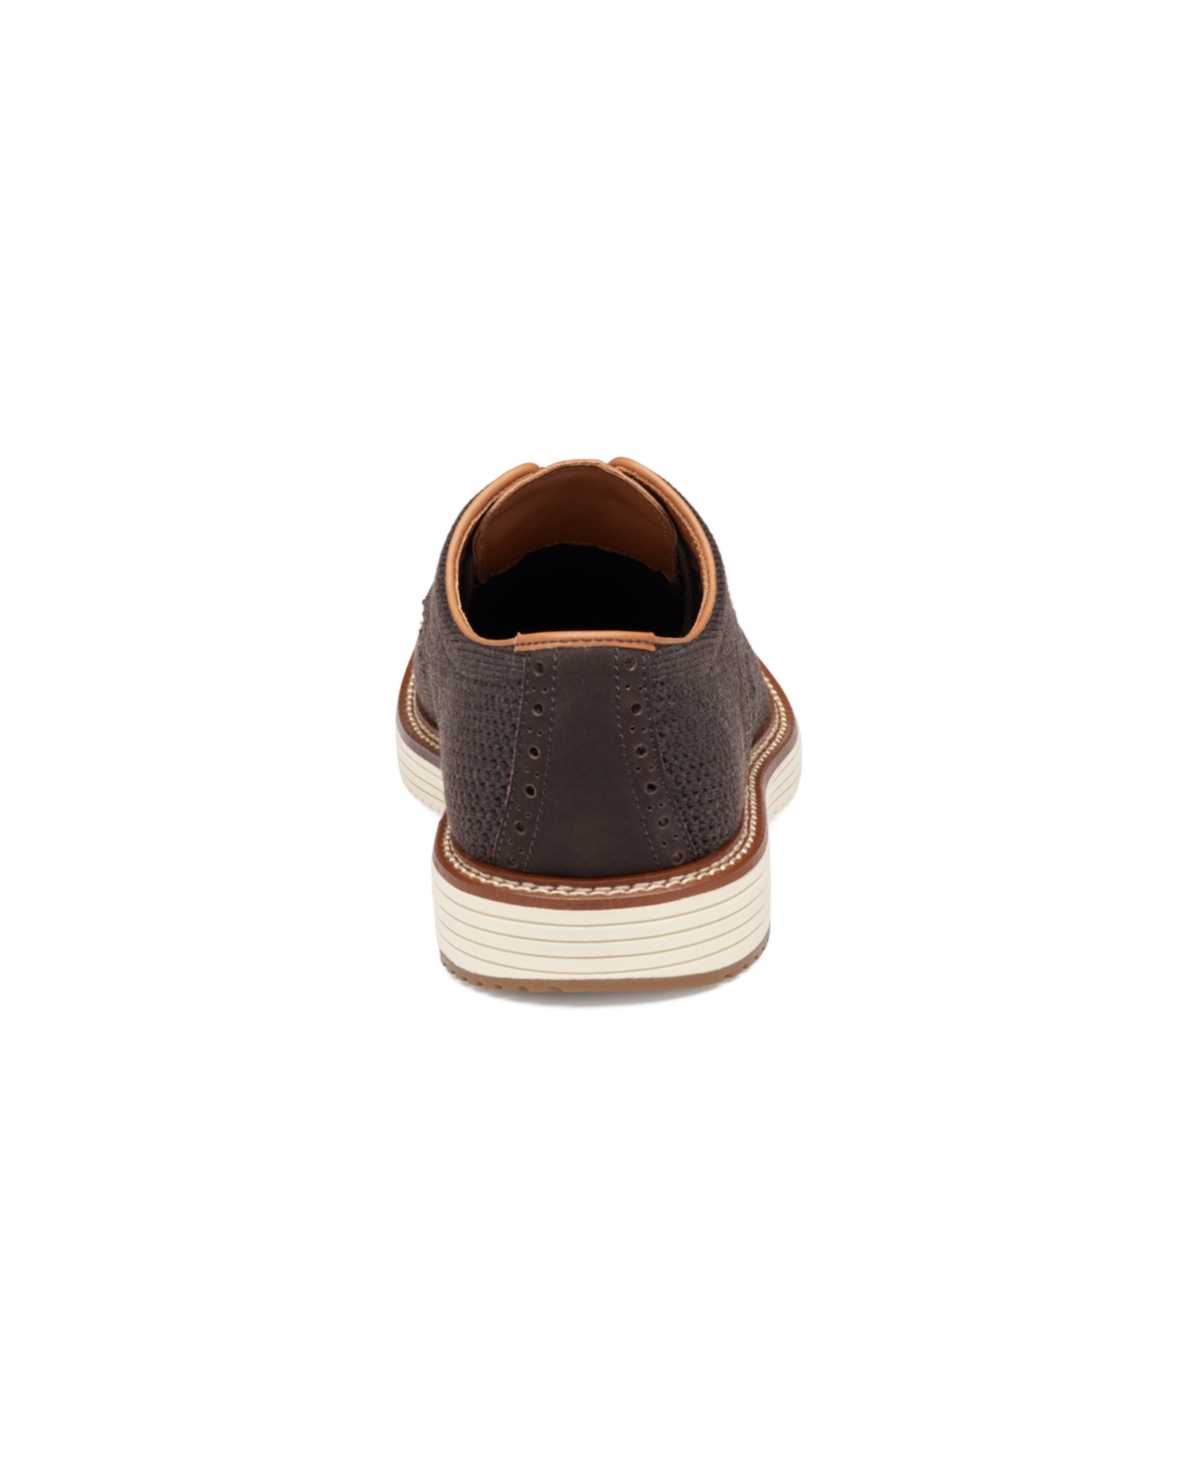 Shop Johnston & Murphy Men's Upton Knit Wingtip Dress Casual Lace Up Sneakers In Brown